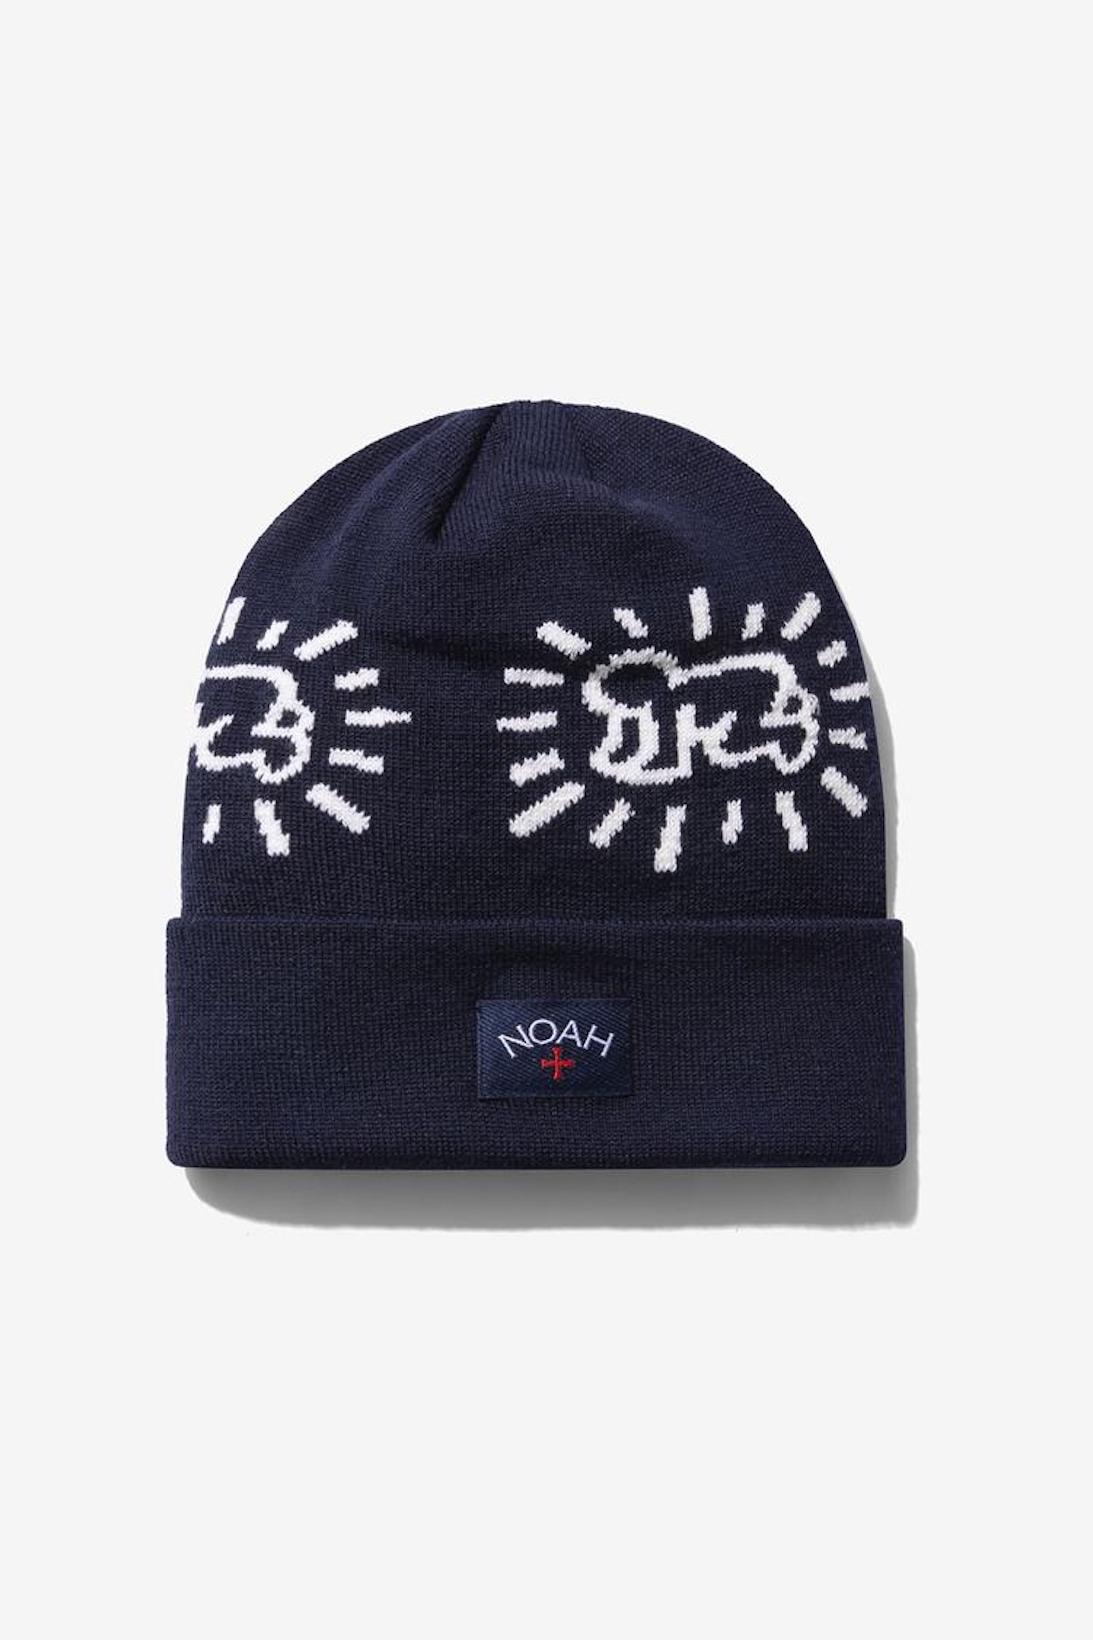 NOAH Keith Haring Christmas Collaboration Collection Beanie